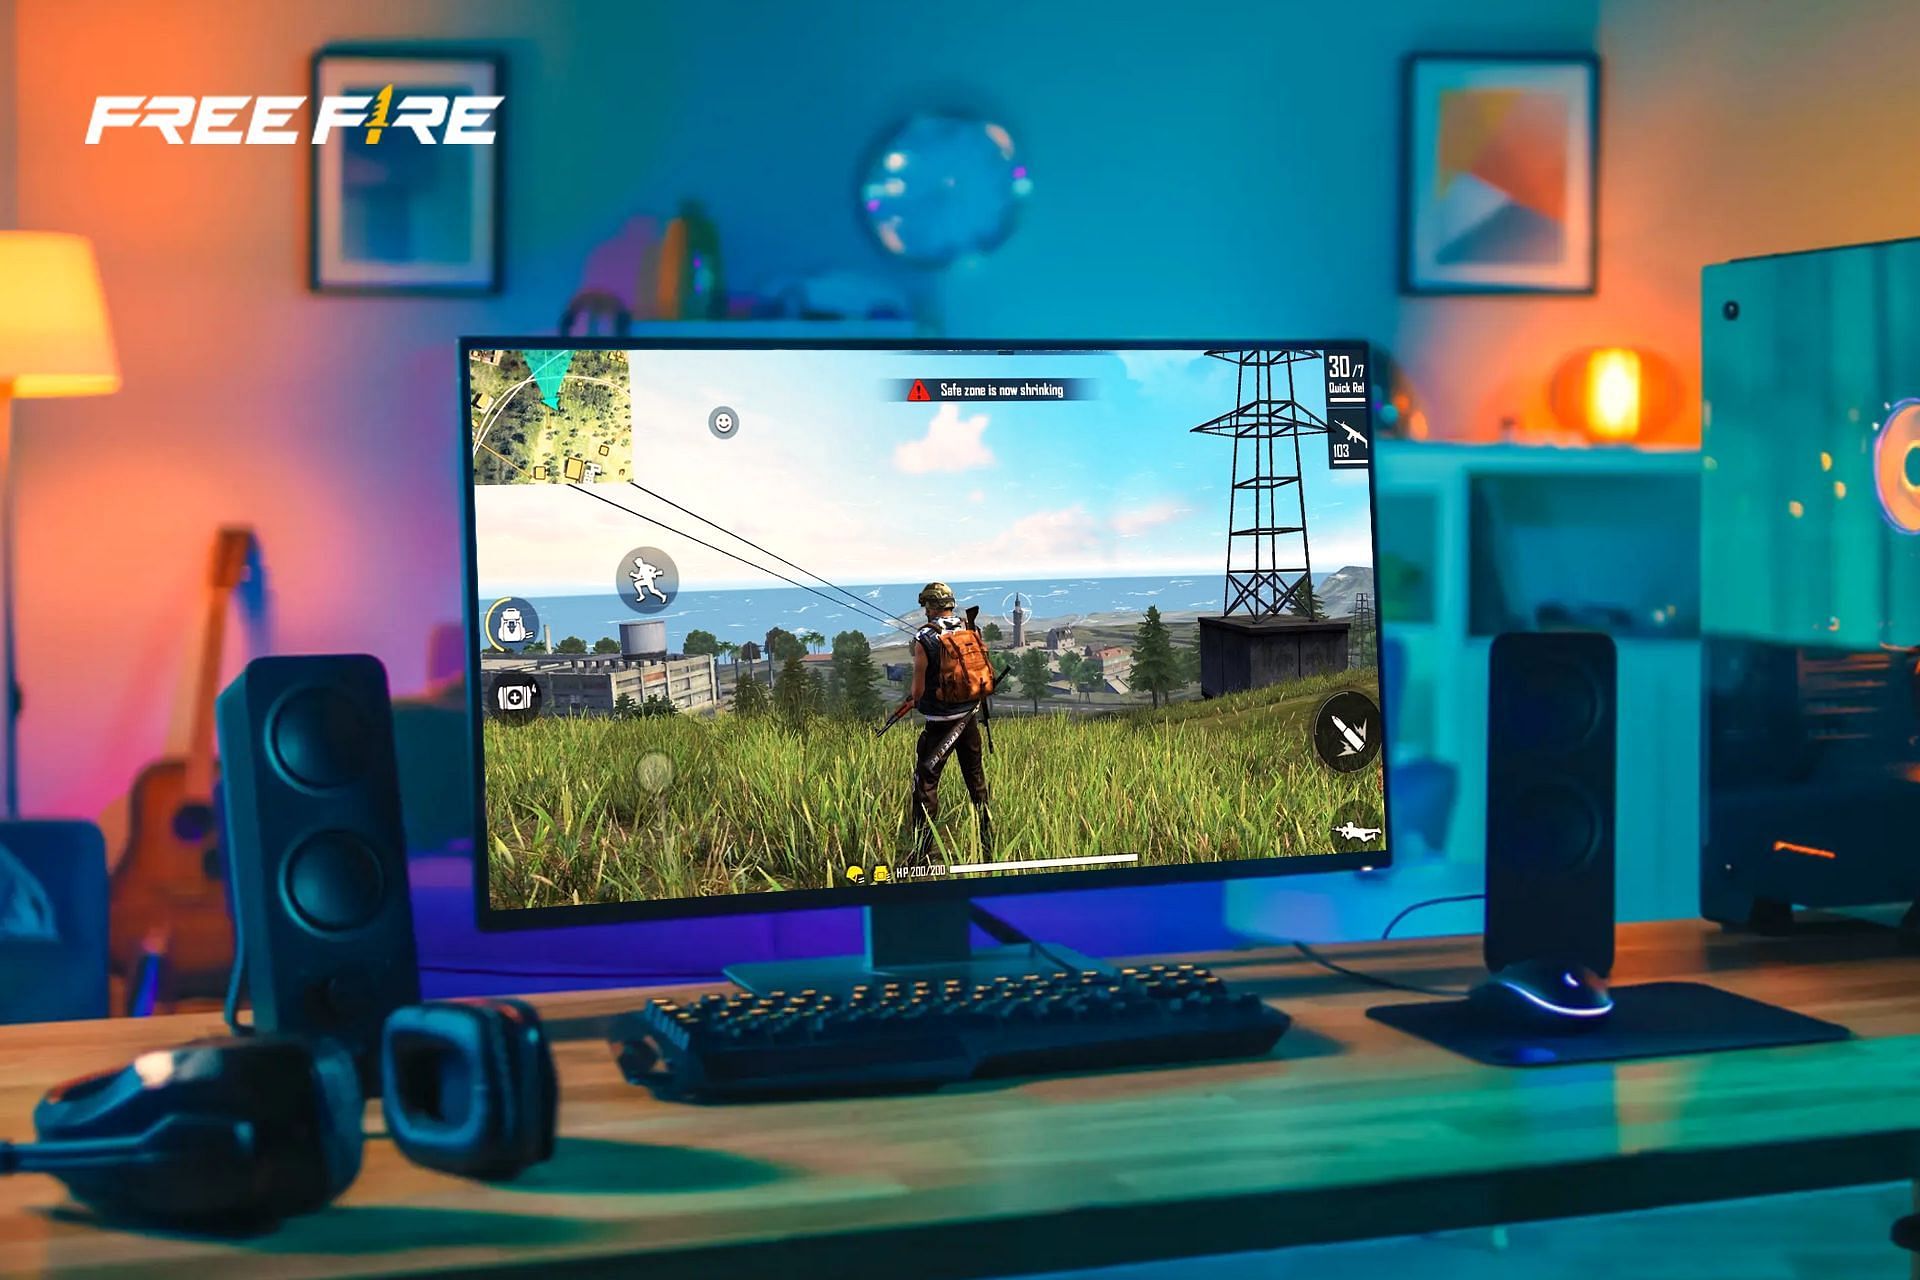 How to play Free Fire on PC? Best settings, keymapping, and more (August 2022), free gaming pc - hpnonline.org